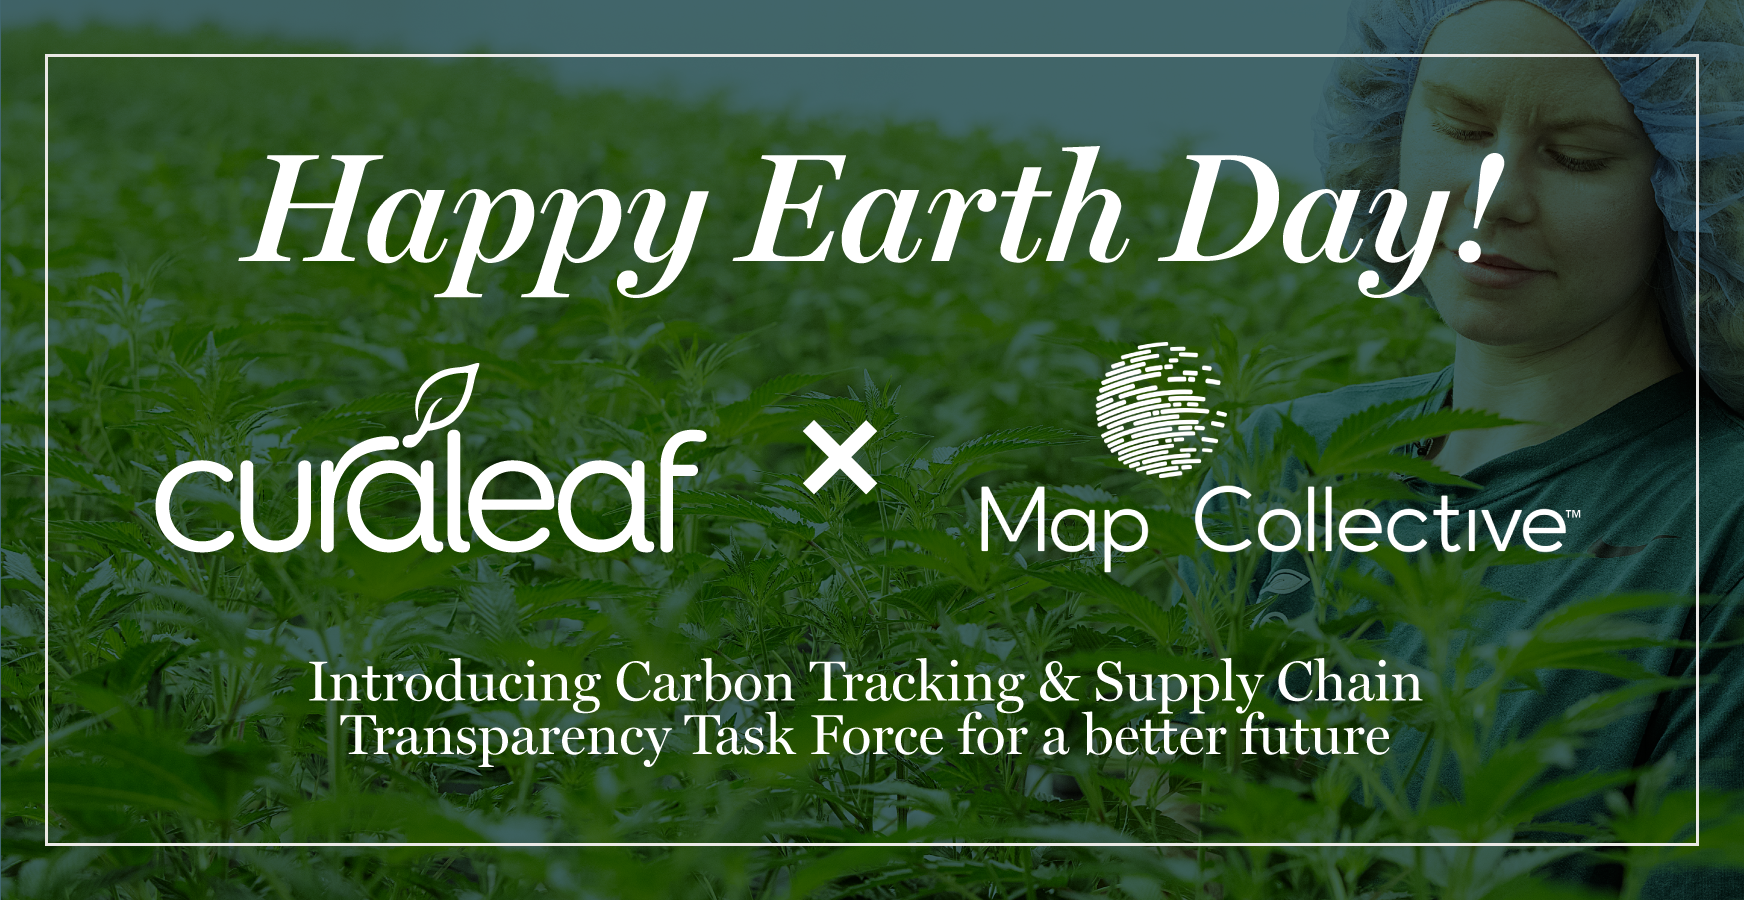 Celebrating Earth Day with Map-Collective